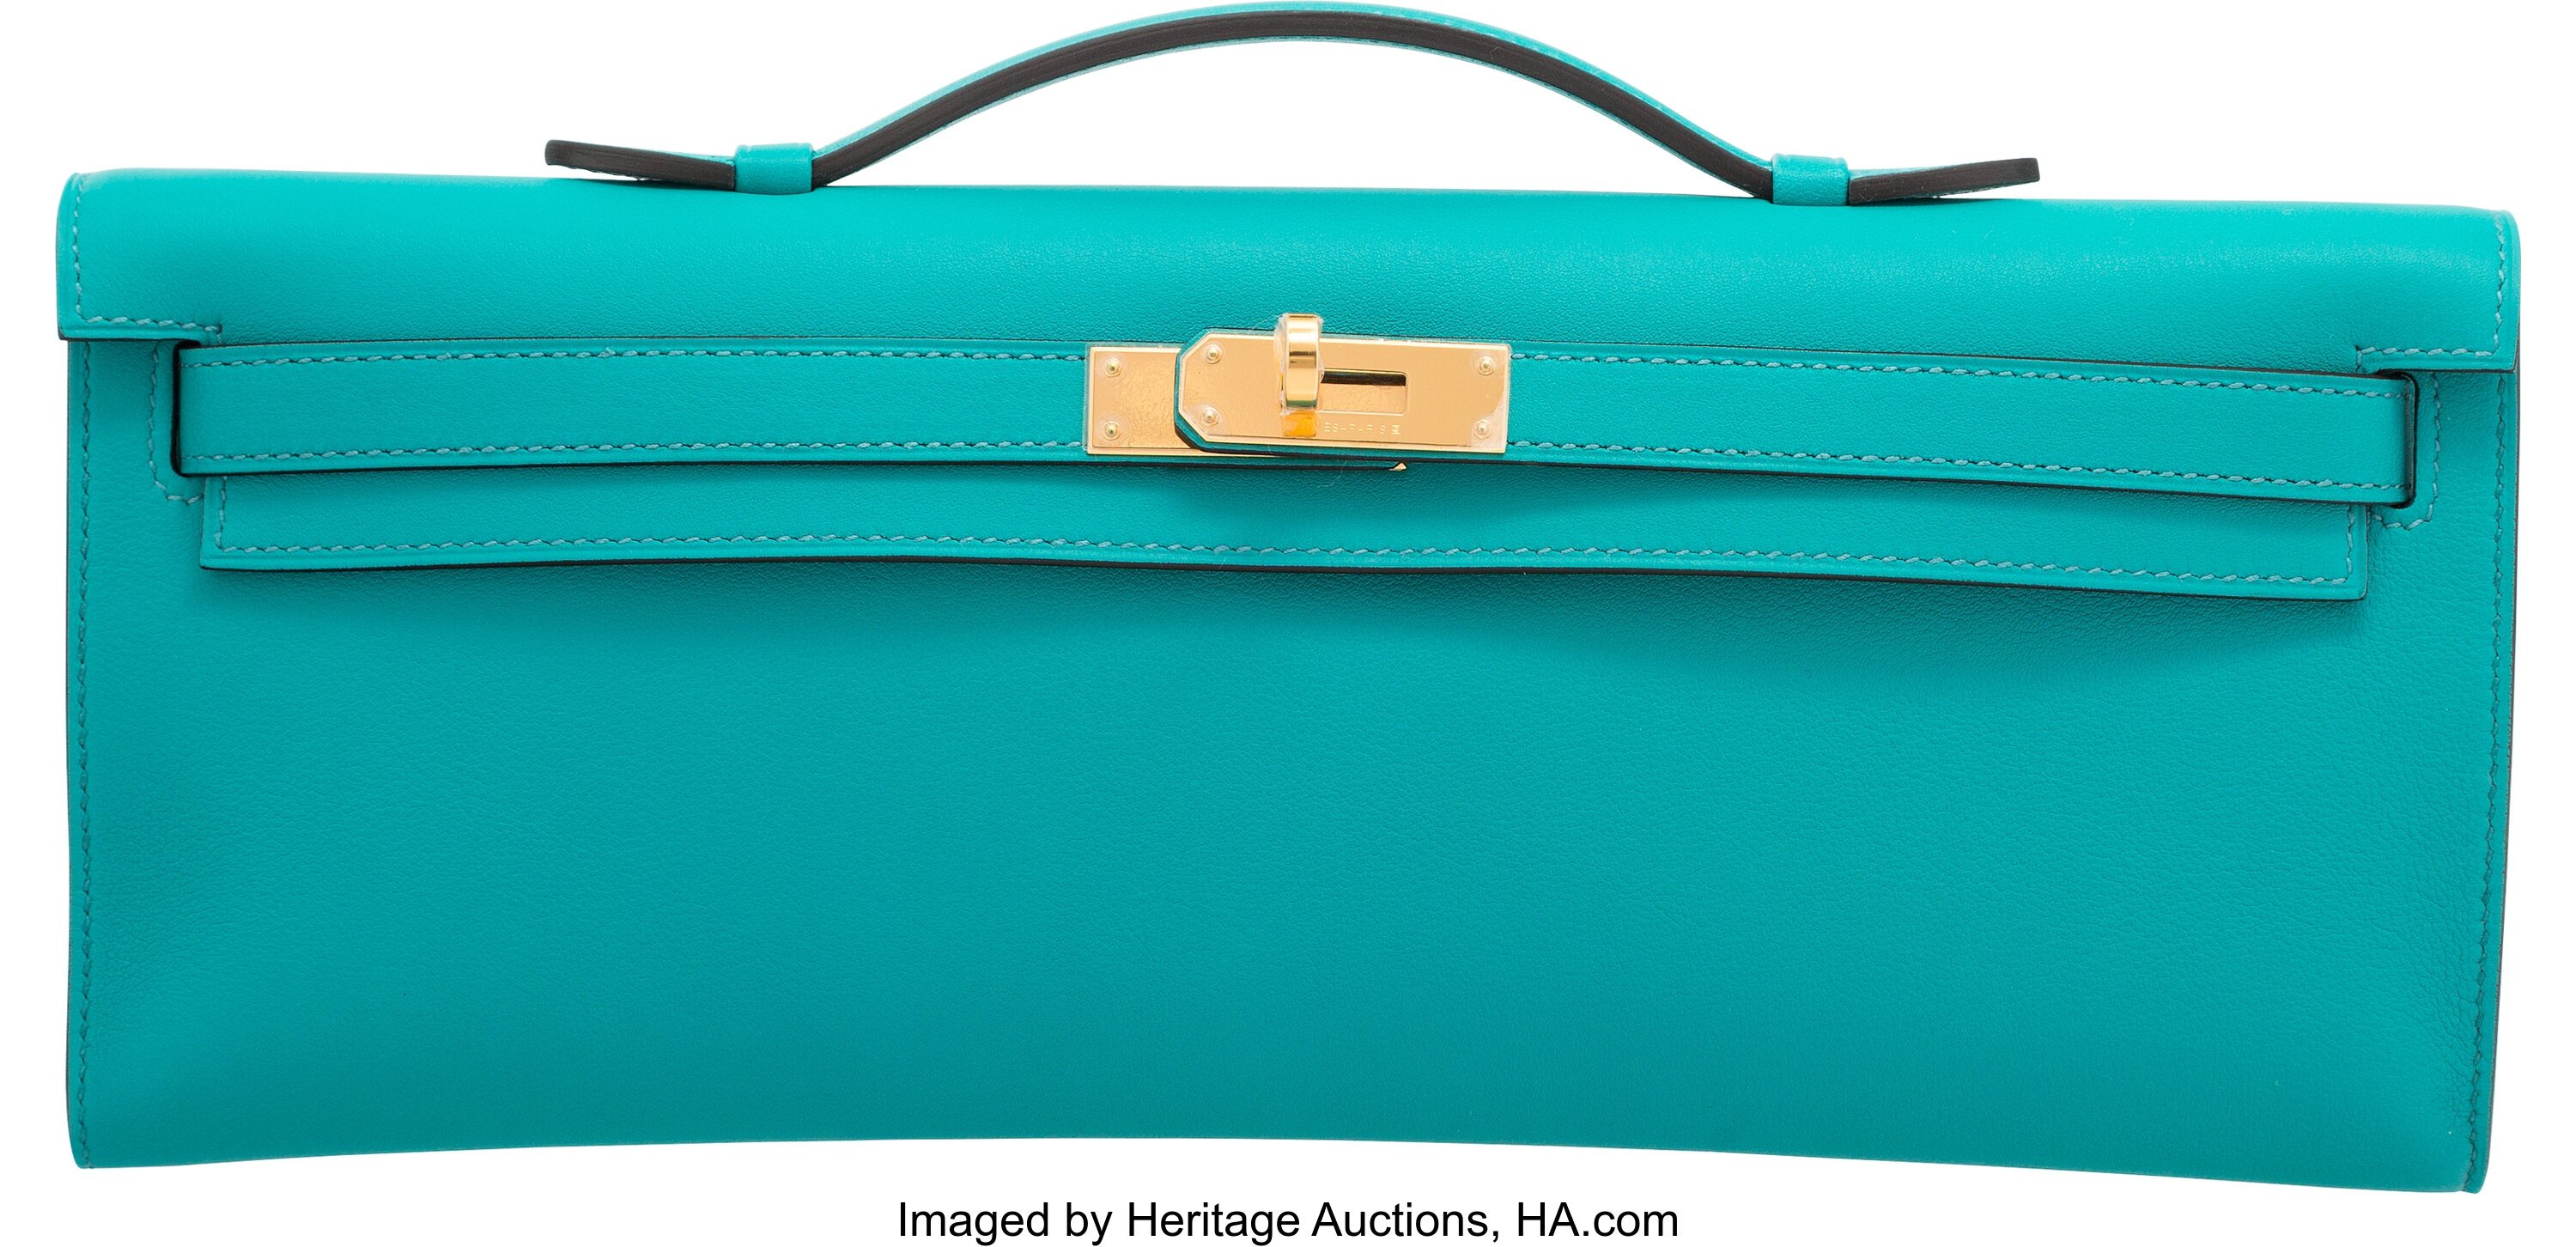 Hermes Kelly Cut Blue Colvert Shiny Nilo Croc with Gold